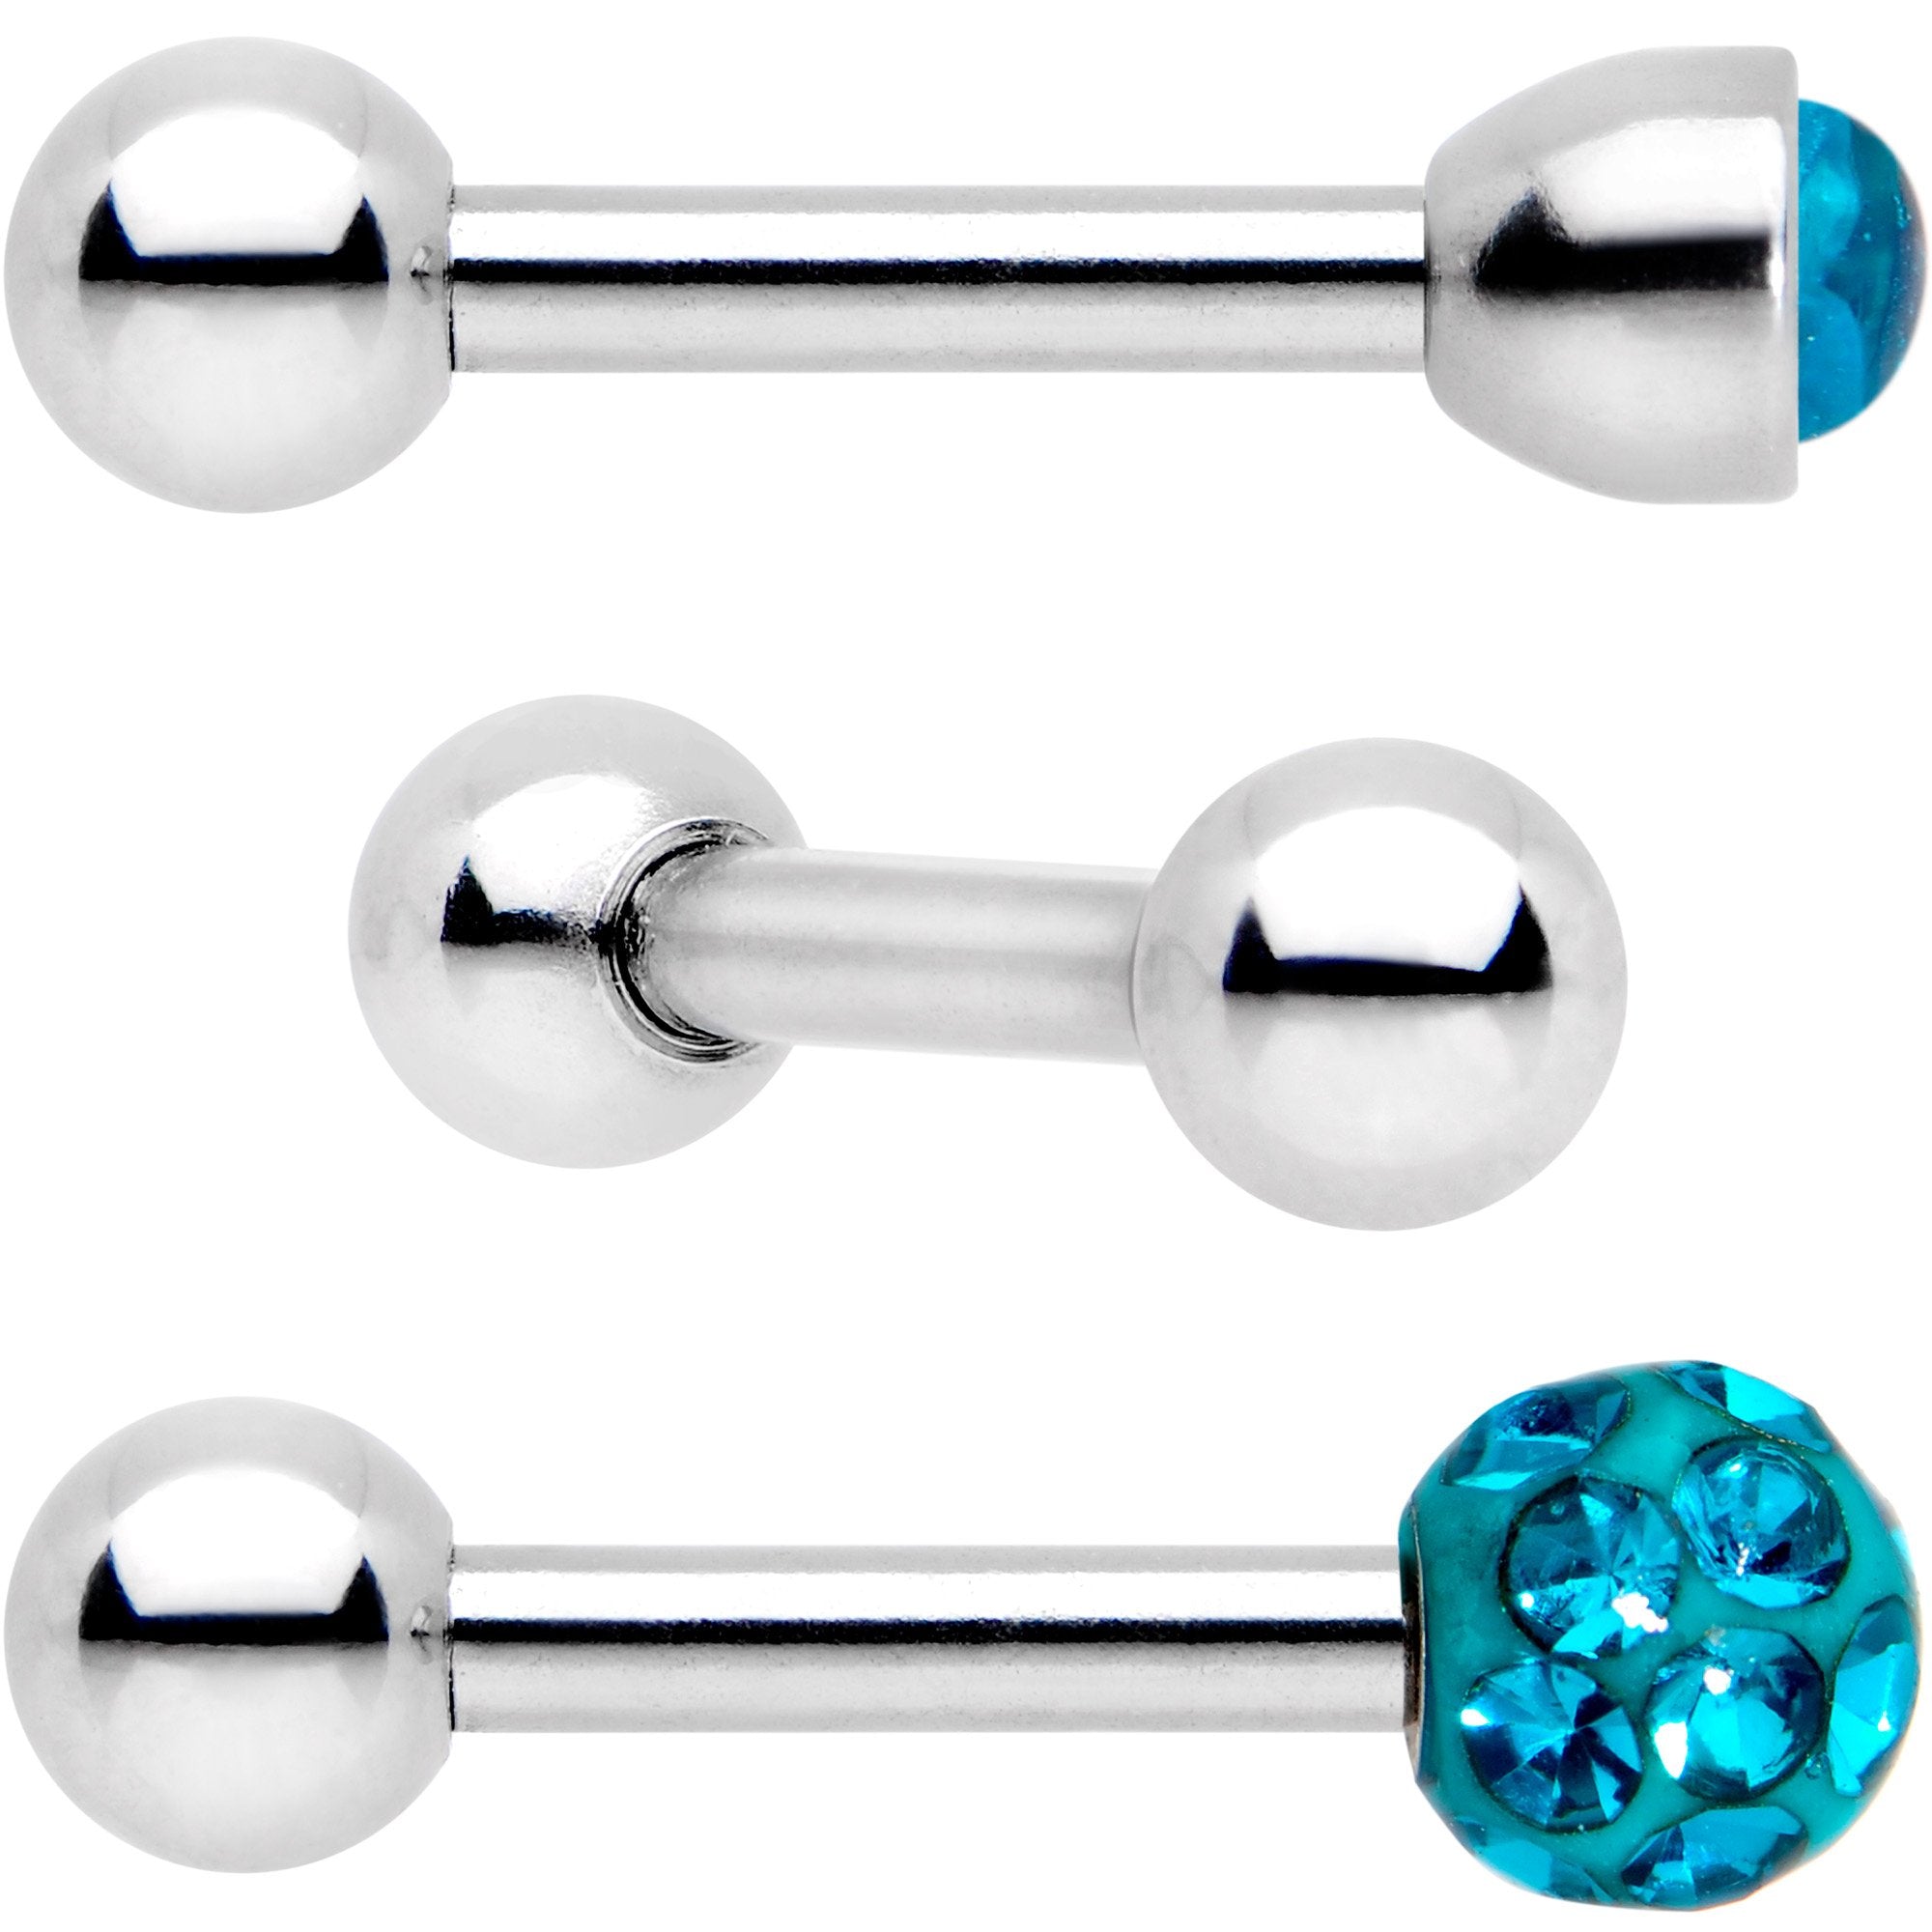 16 Gauge 1/4 Teal Faux Opal Inlay Cartilage Tragus Earring 3 Pack Set